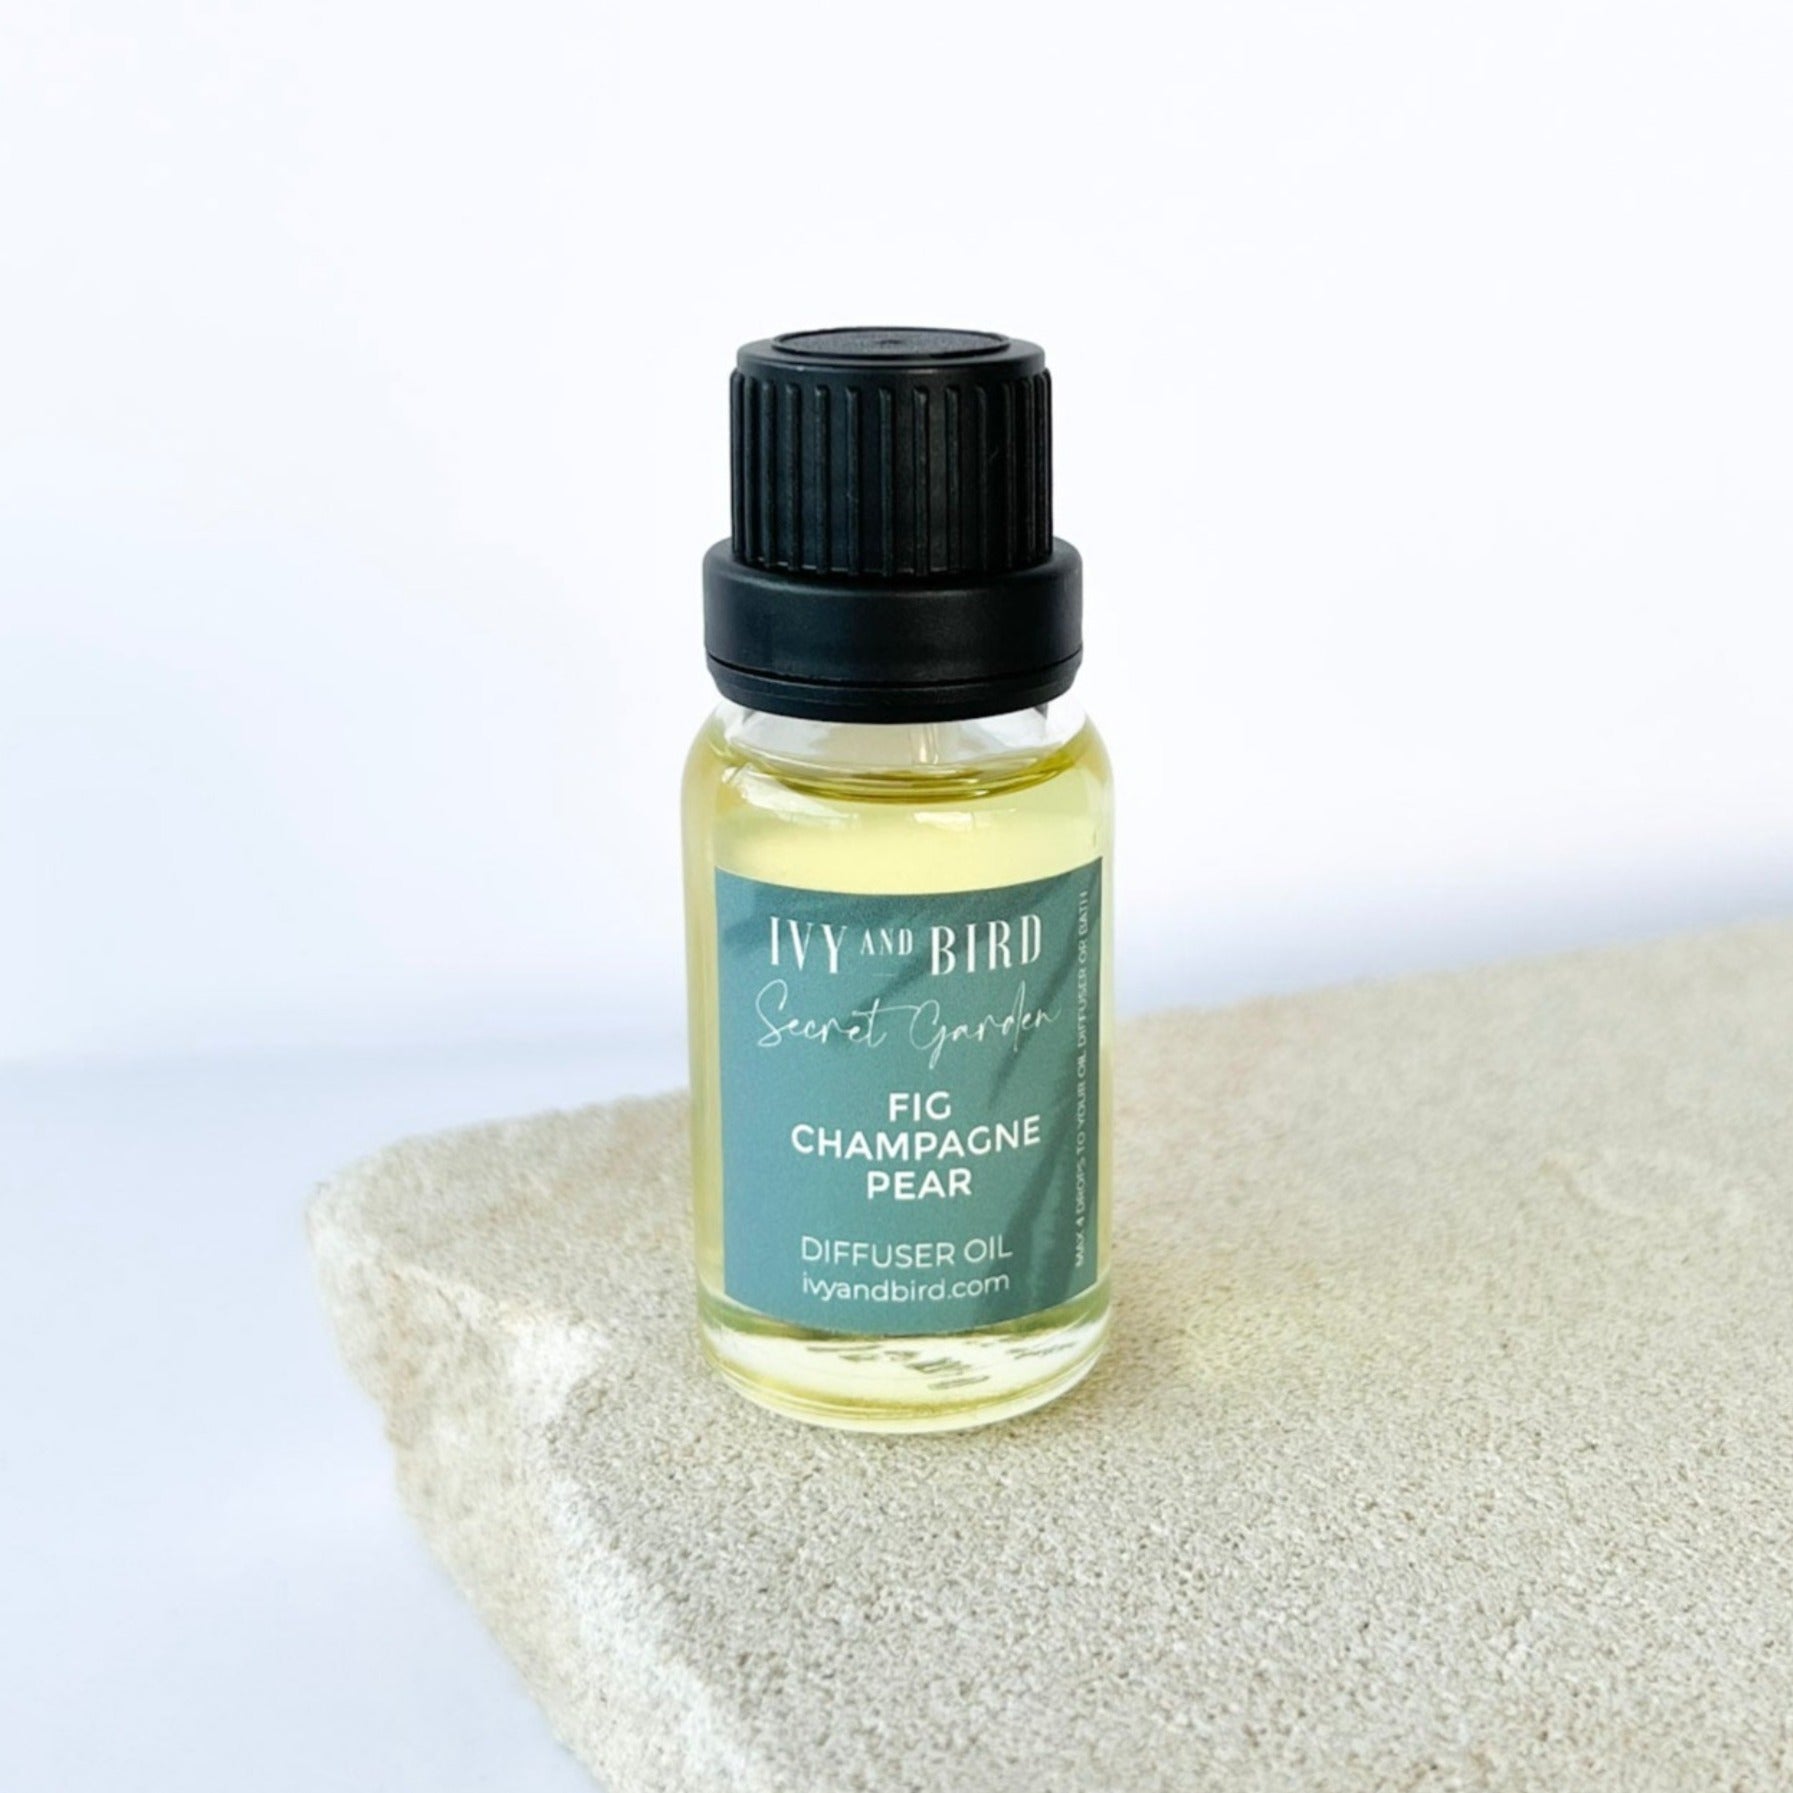 diffuser oil drops in scent fig champagne and pear